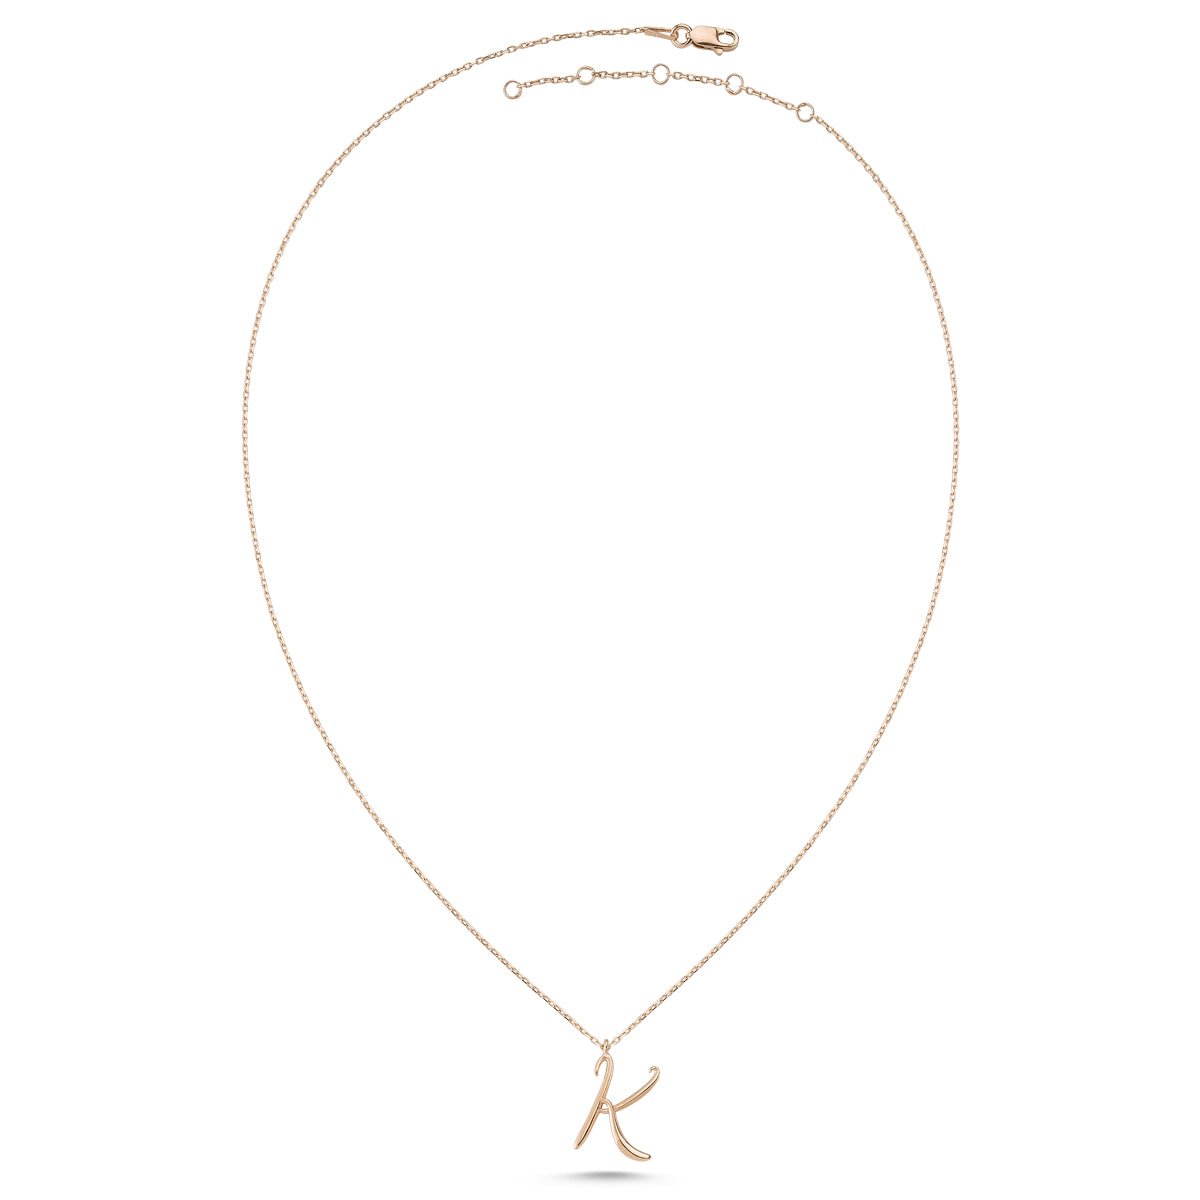 Gold Initial Necklace - Personalised Letter Pendant